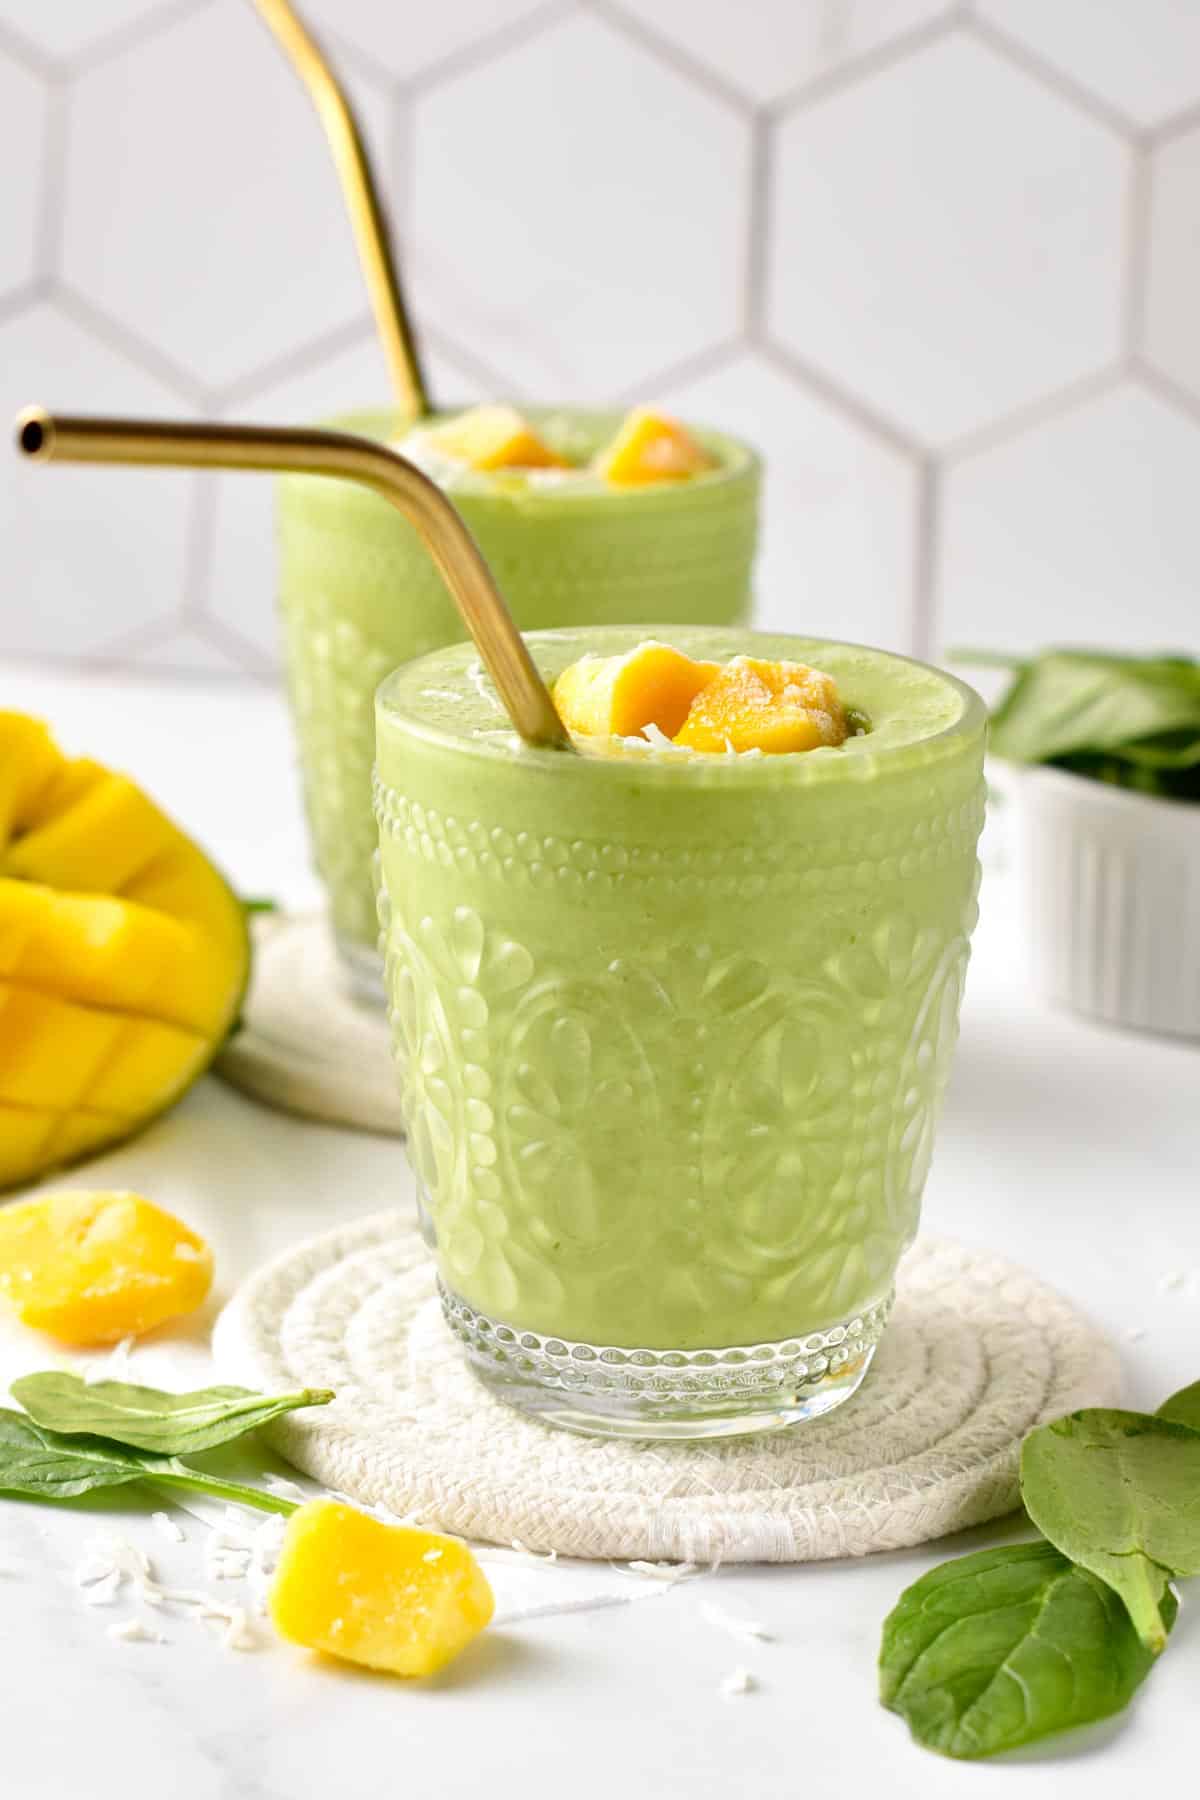 This Mango Spinach Smoothie is a refreshing, smooth, and creamy green smoothie packed with vitamins from leafy greens.